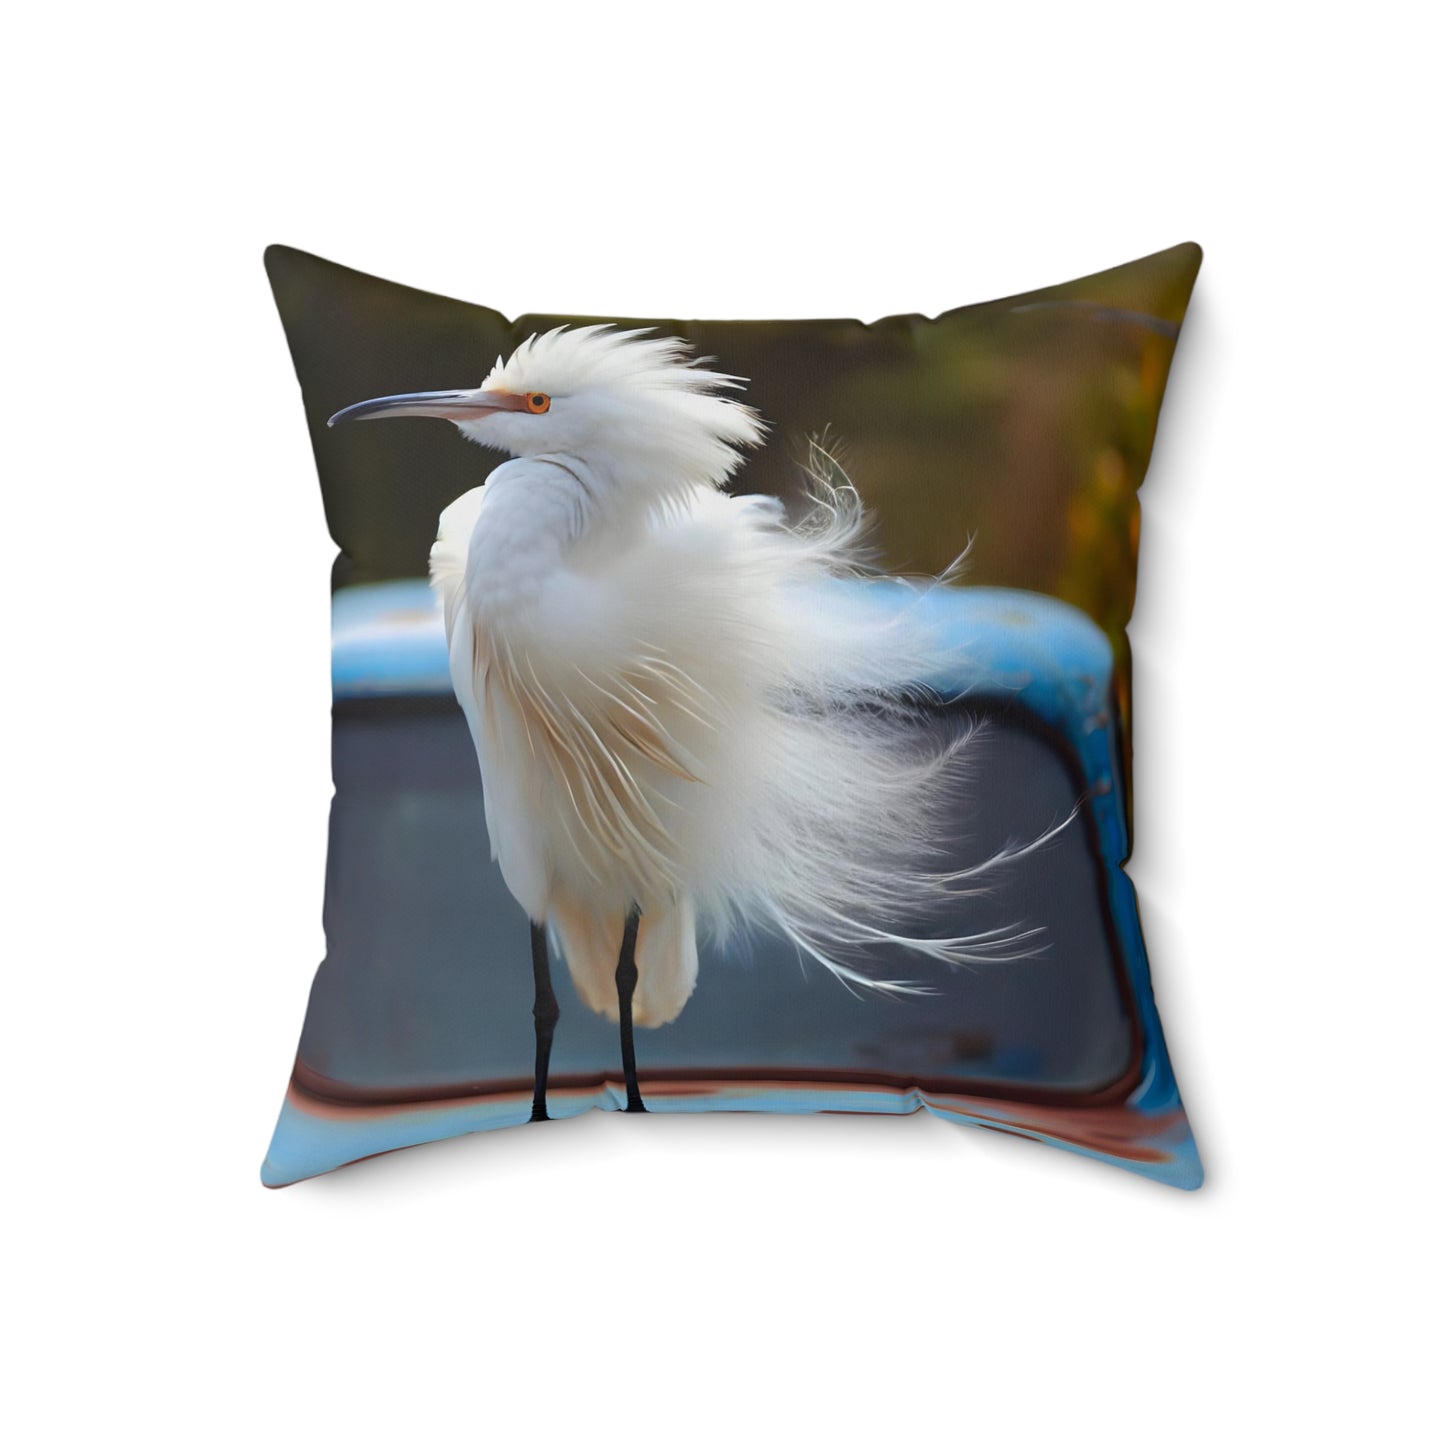 The Hitchhiker - Spun Polyester Square Pillow